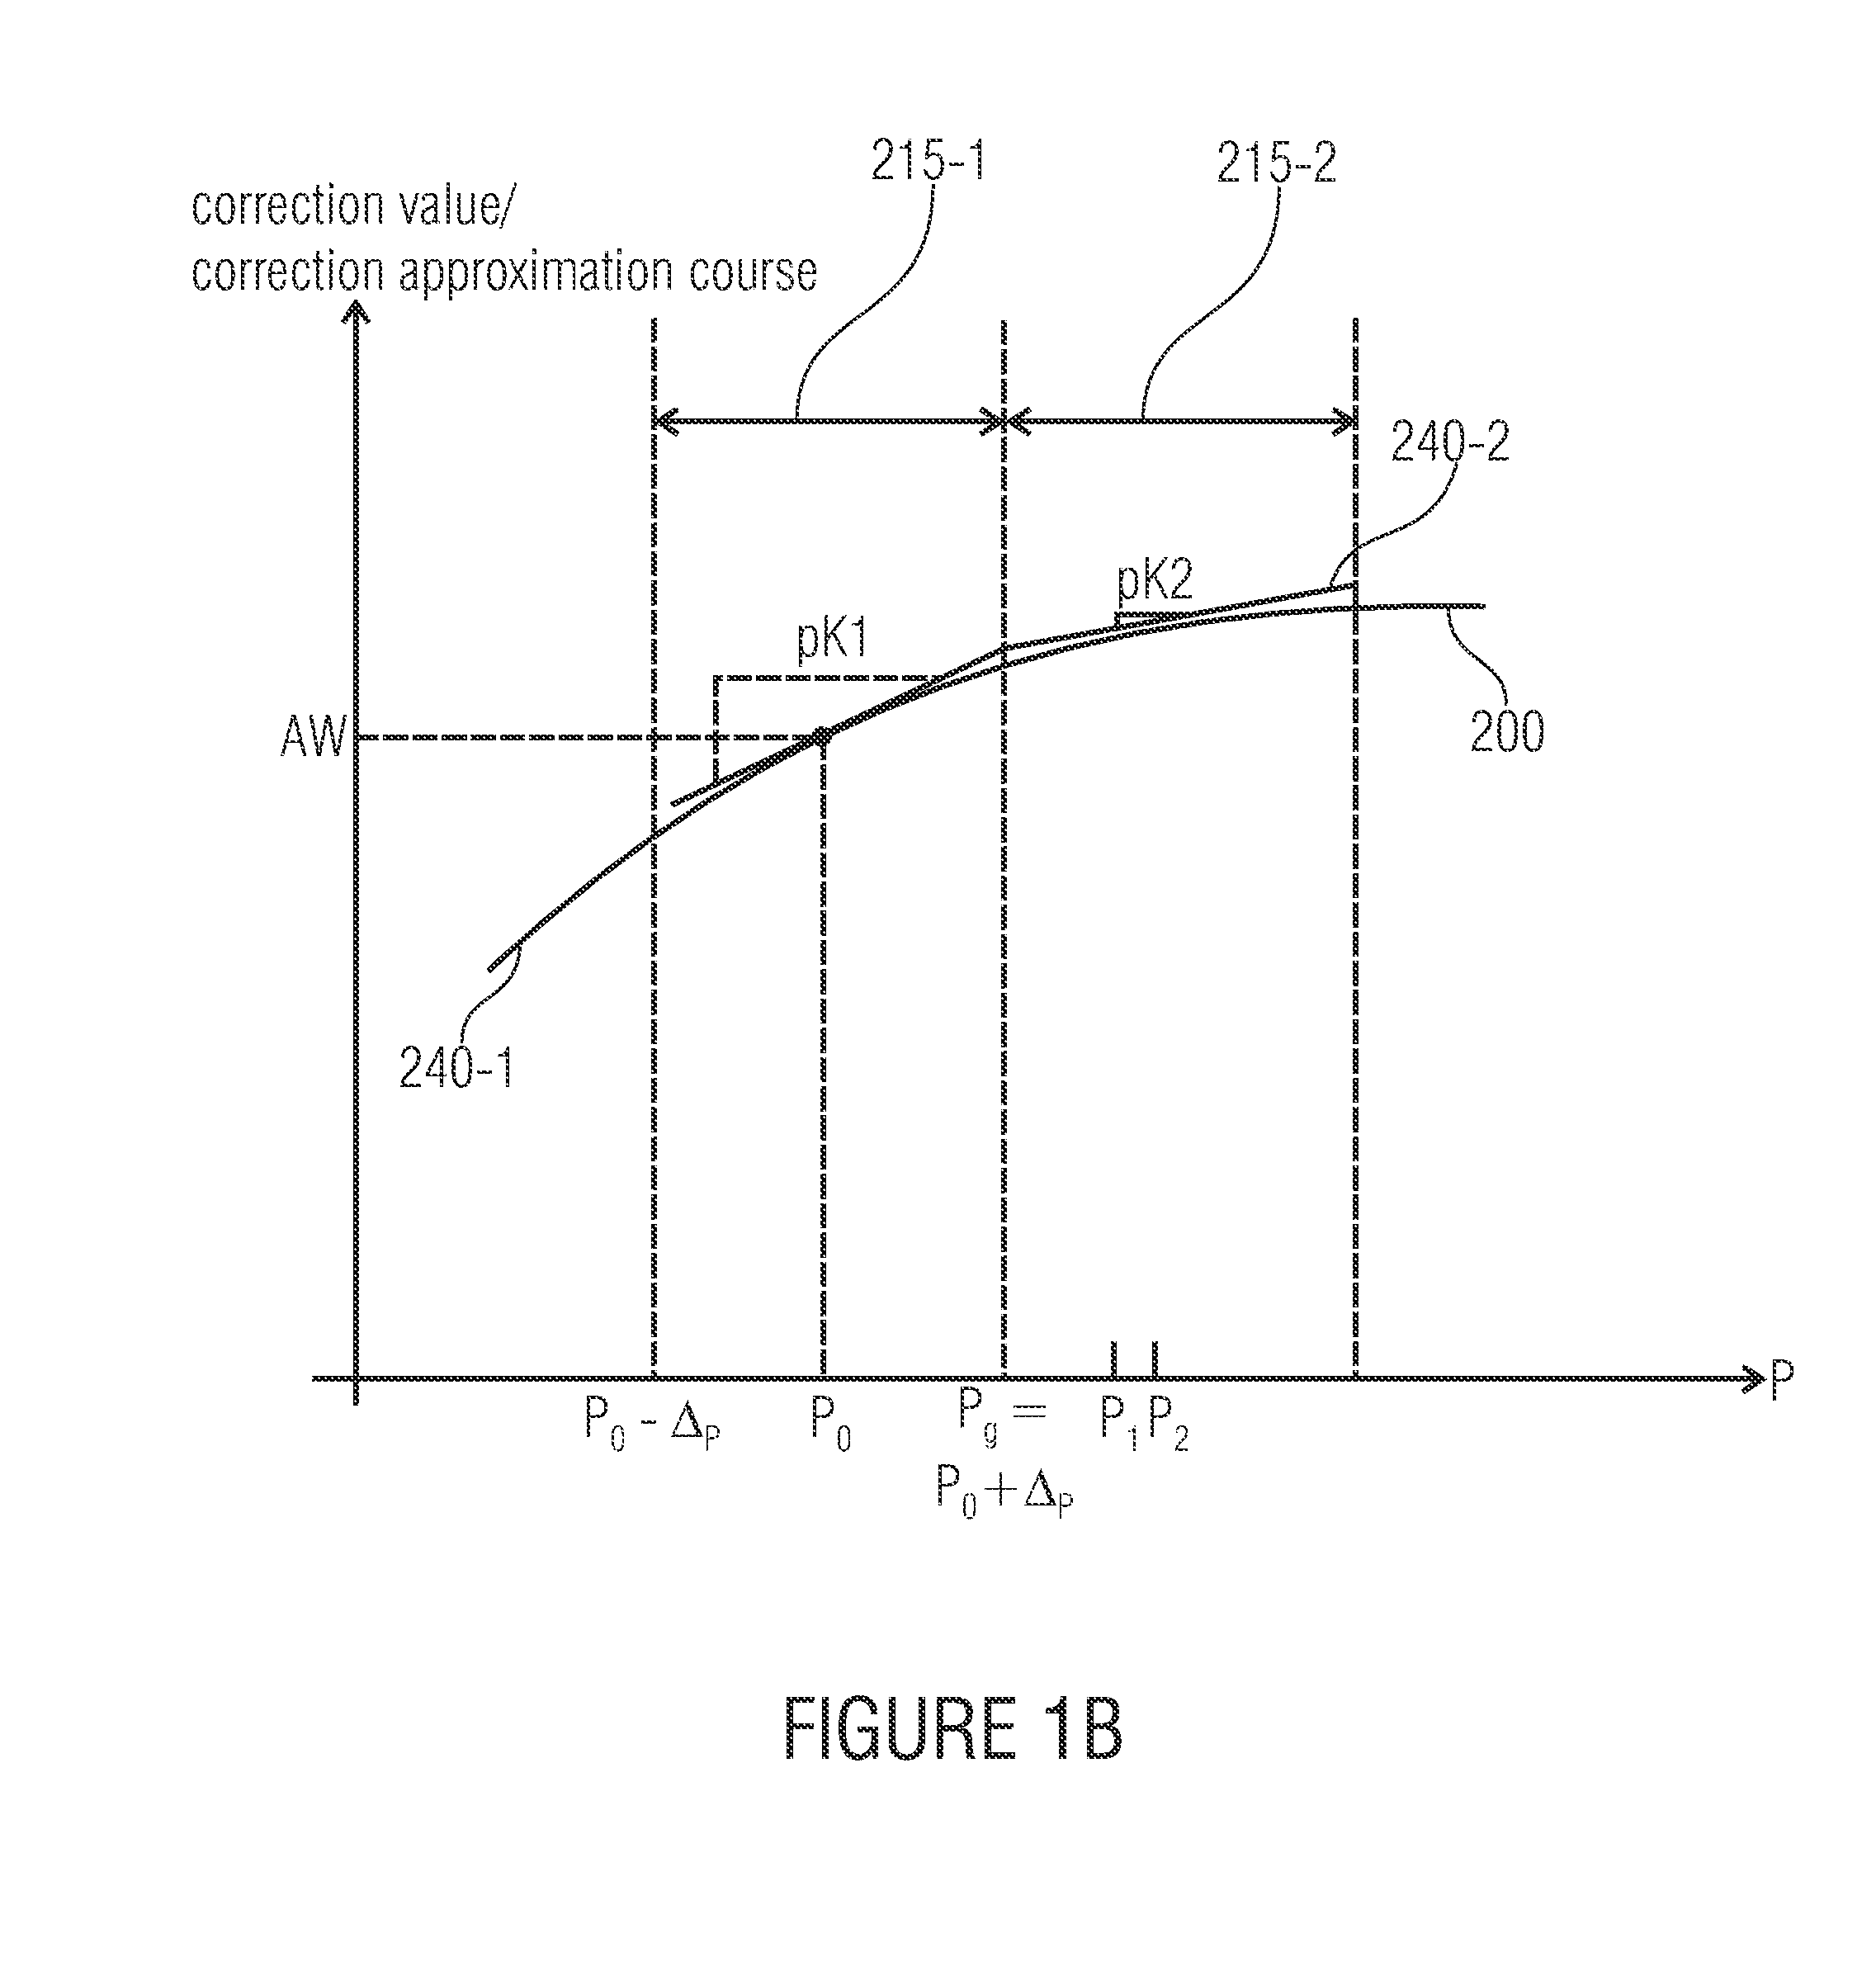 Method for determining, section after section, a parameter-dependent correction value approximation course and sensor arrangement